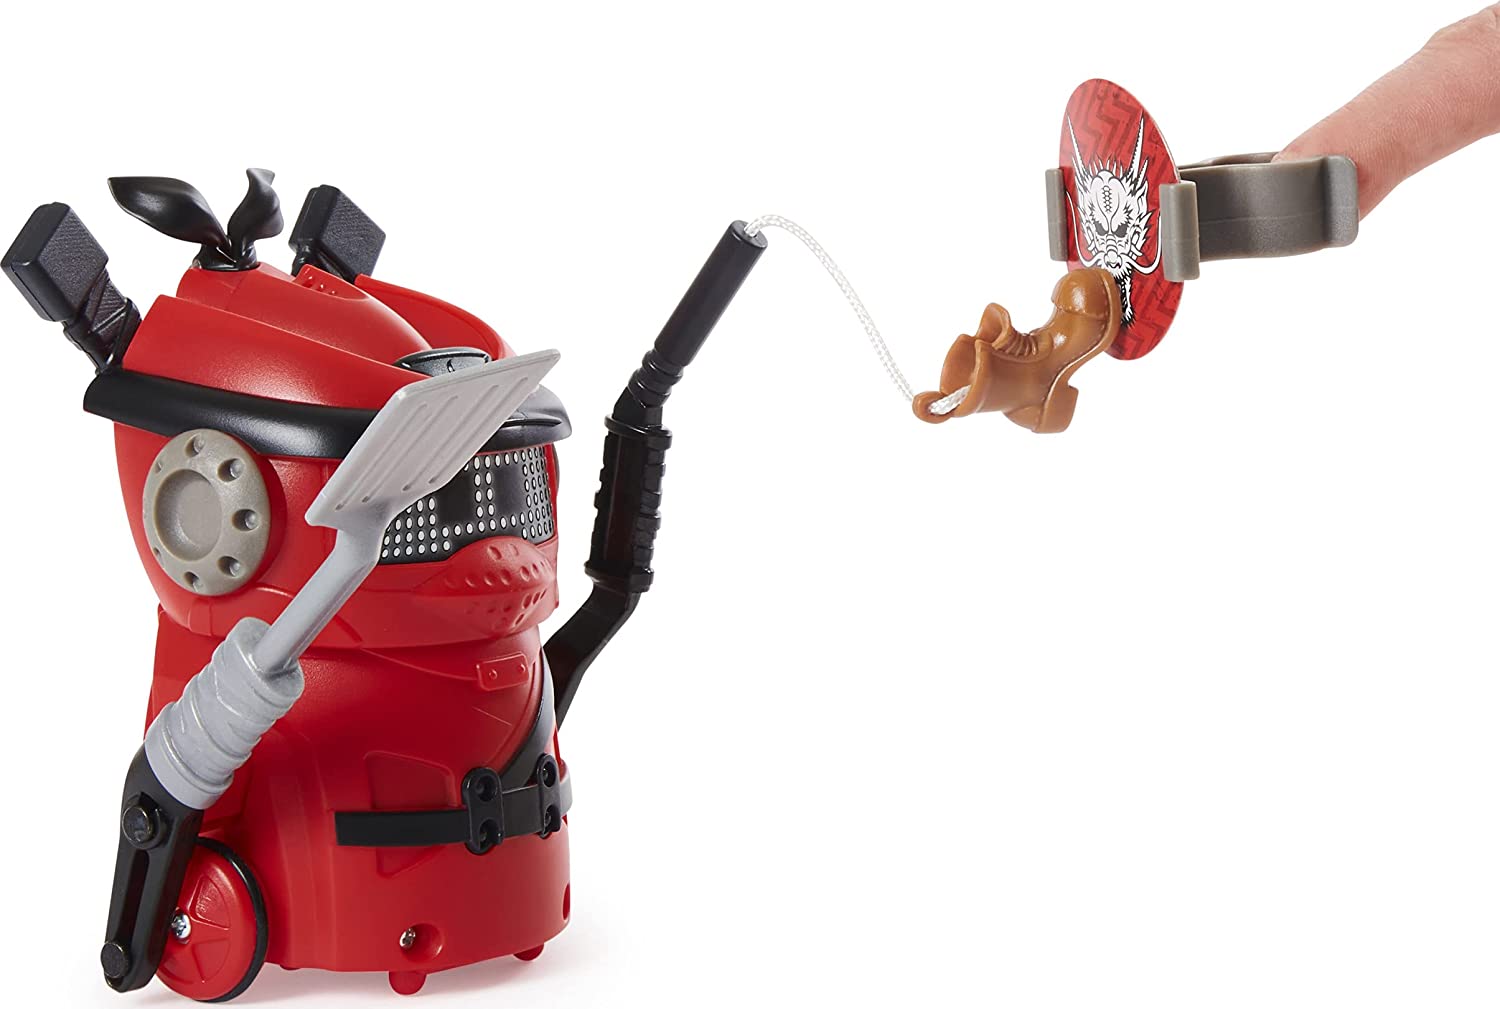 A red Ninja Bots holding a spatula and a shoe on a string aiming for a target.